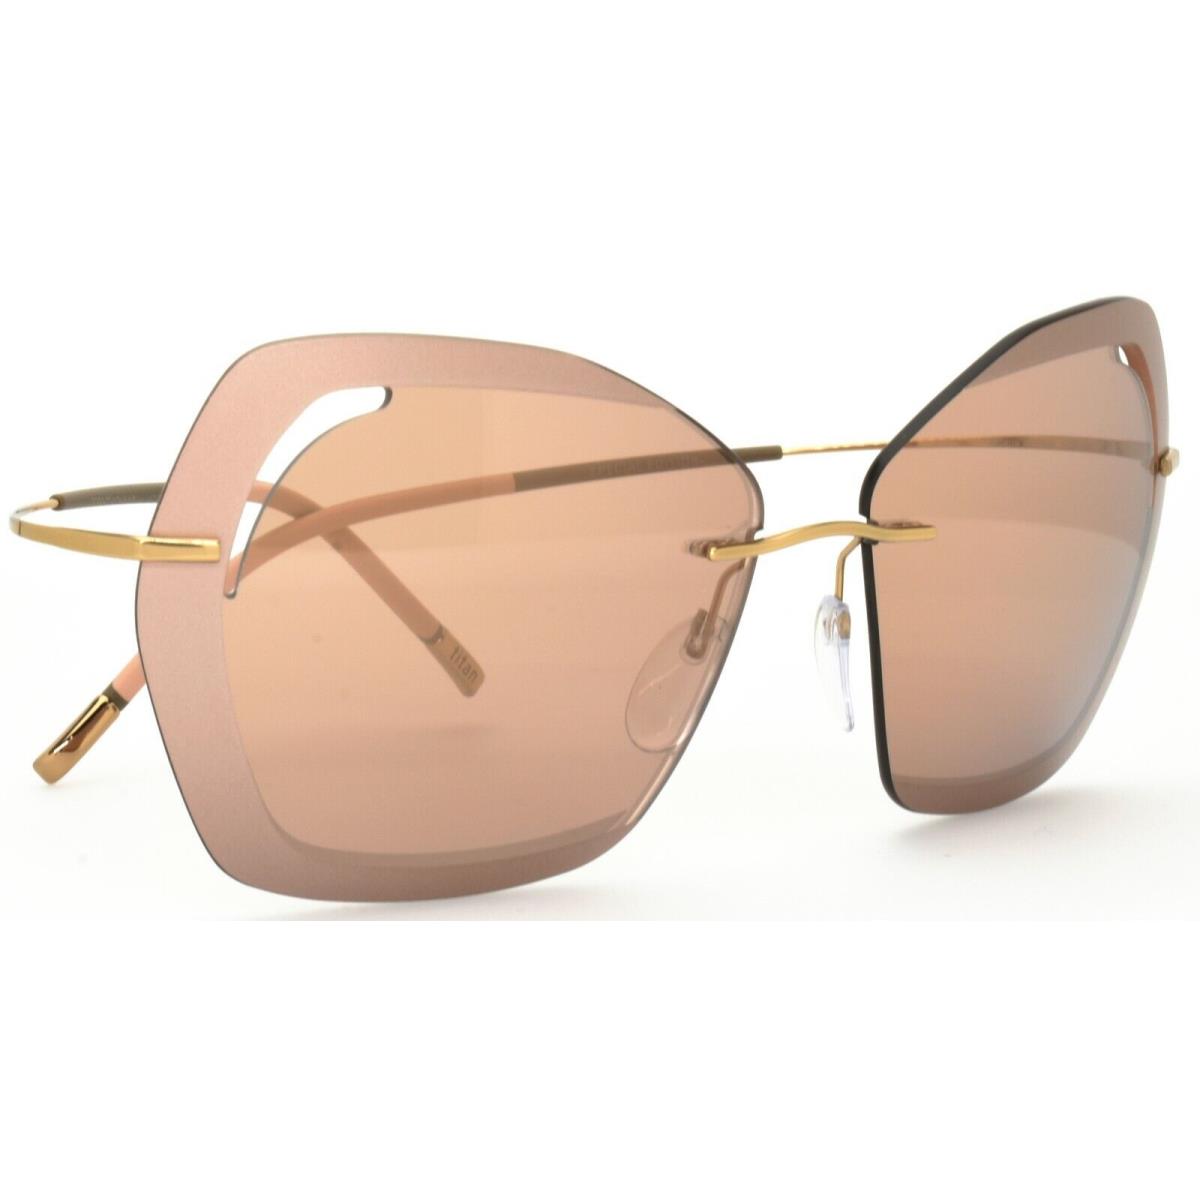 Silhouette sunglasses  - Pink Frame